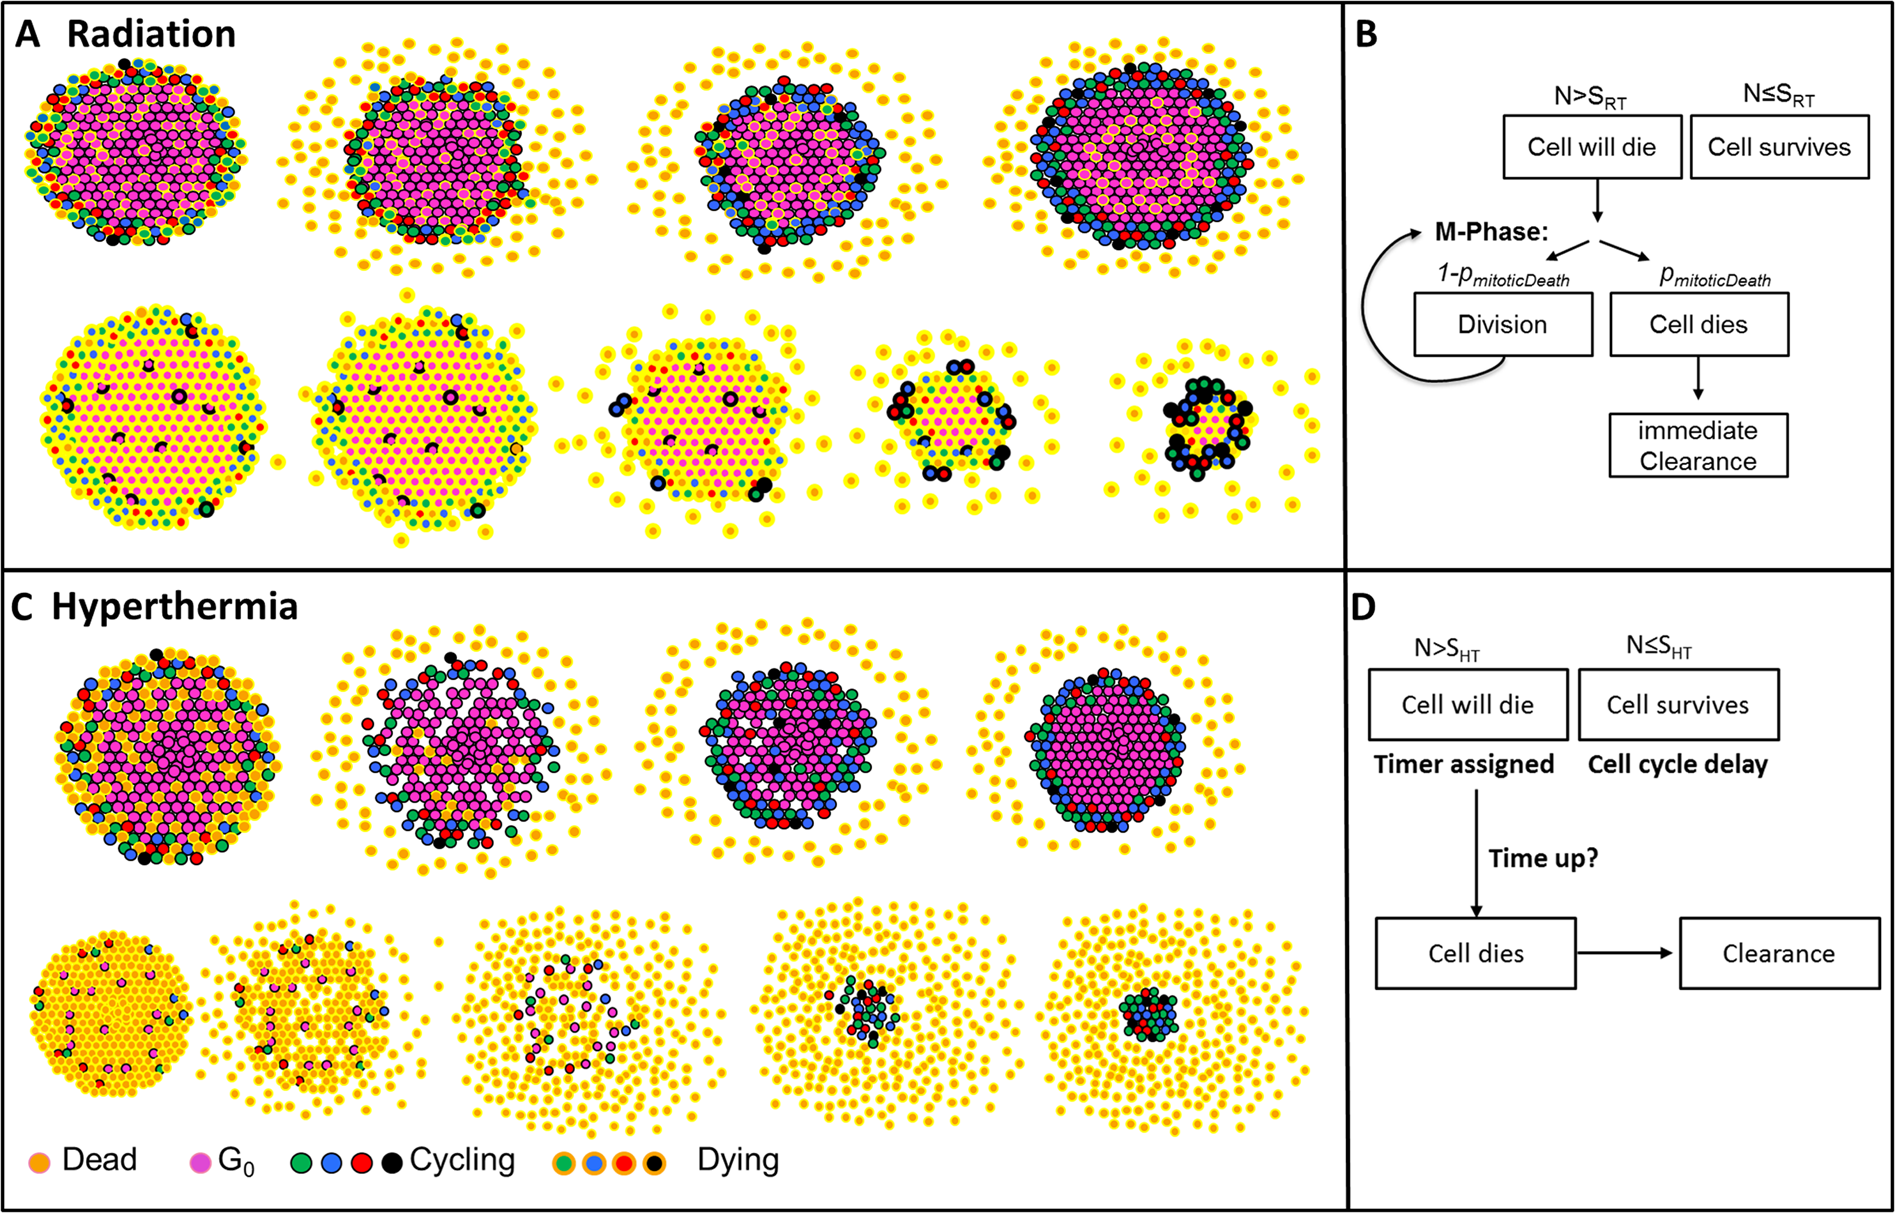 A cellular automaton model for spheroid response to radiation and  hyperthermia treatments | Scientific Reports